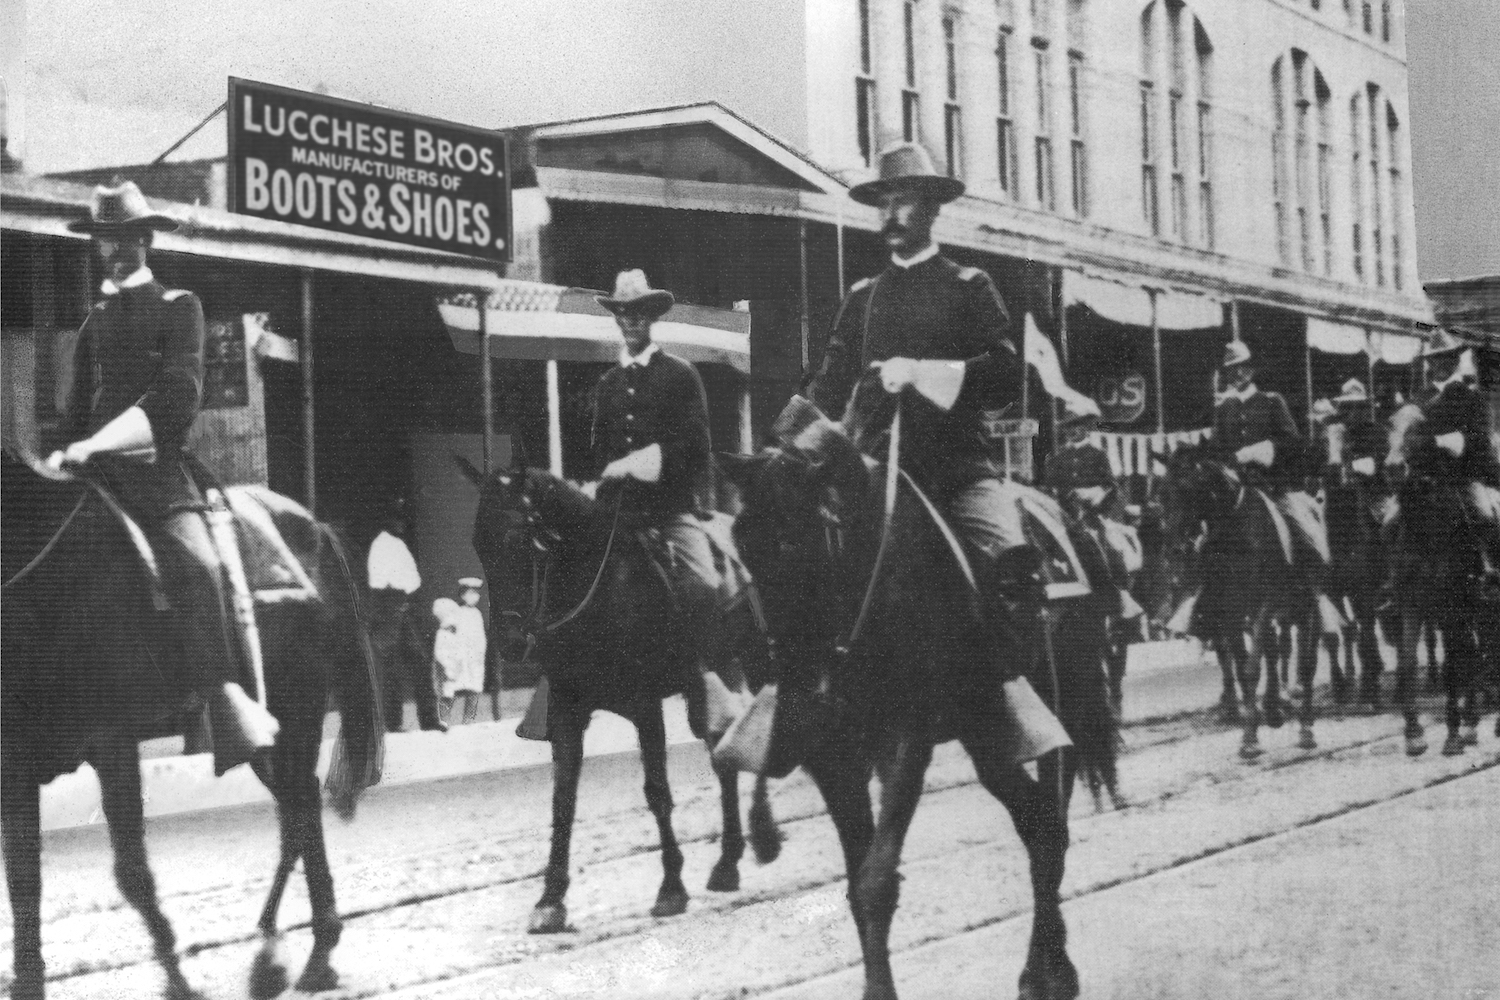 The First Reg. Texas Volunteer Cavalry marches in front of Lucchese Bros. Store in San Antonio in 1889